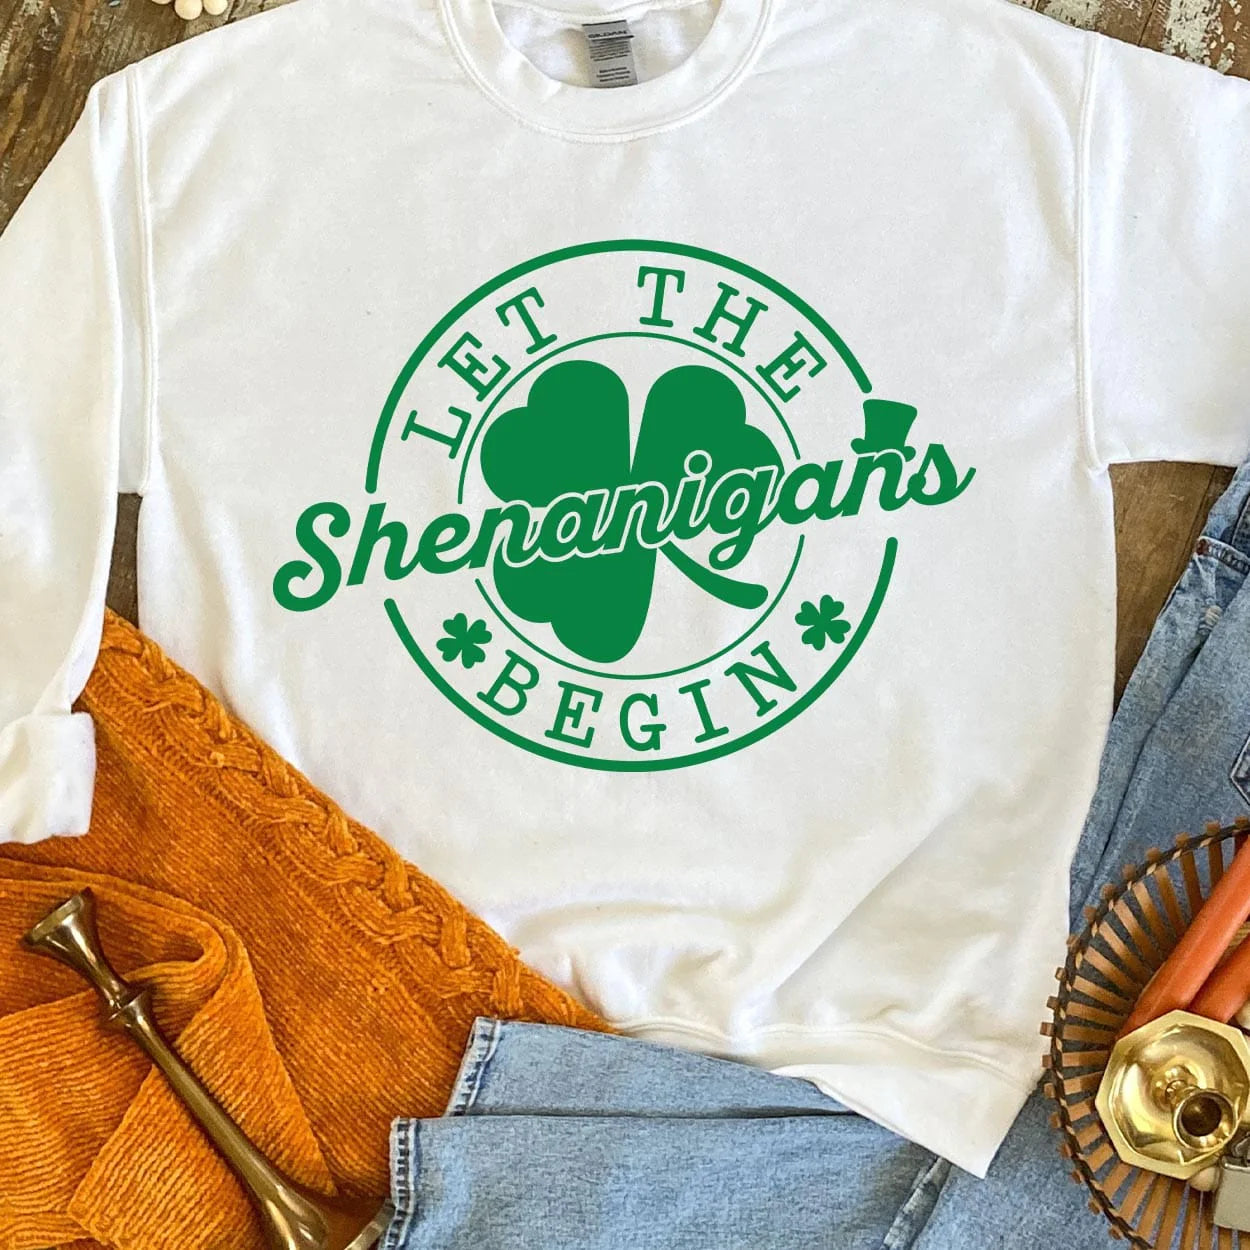 A white short sleeve tee featuring a large circular graphic saying "Let the shenanigans begin" in dark green with a clover behind "shenanigans" and little clovers before and after "begin". Item is pictured on a brown background